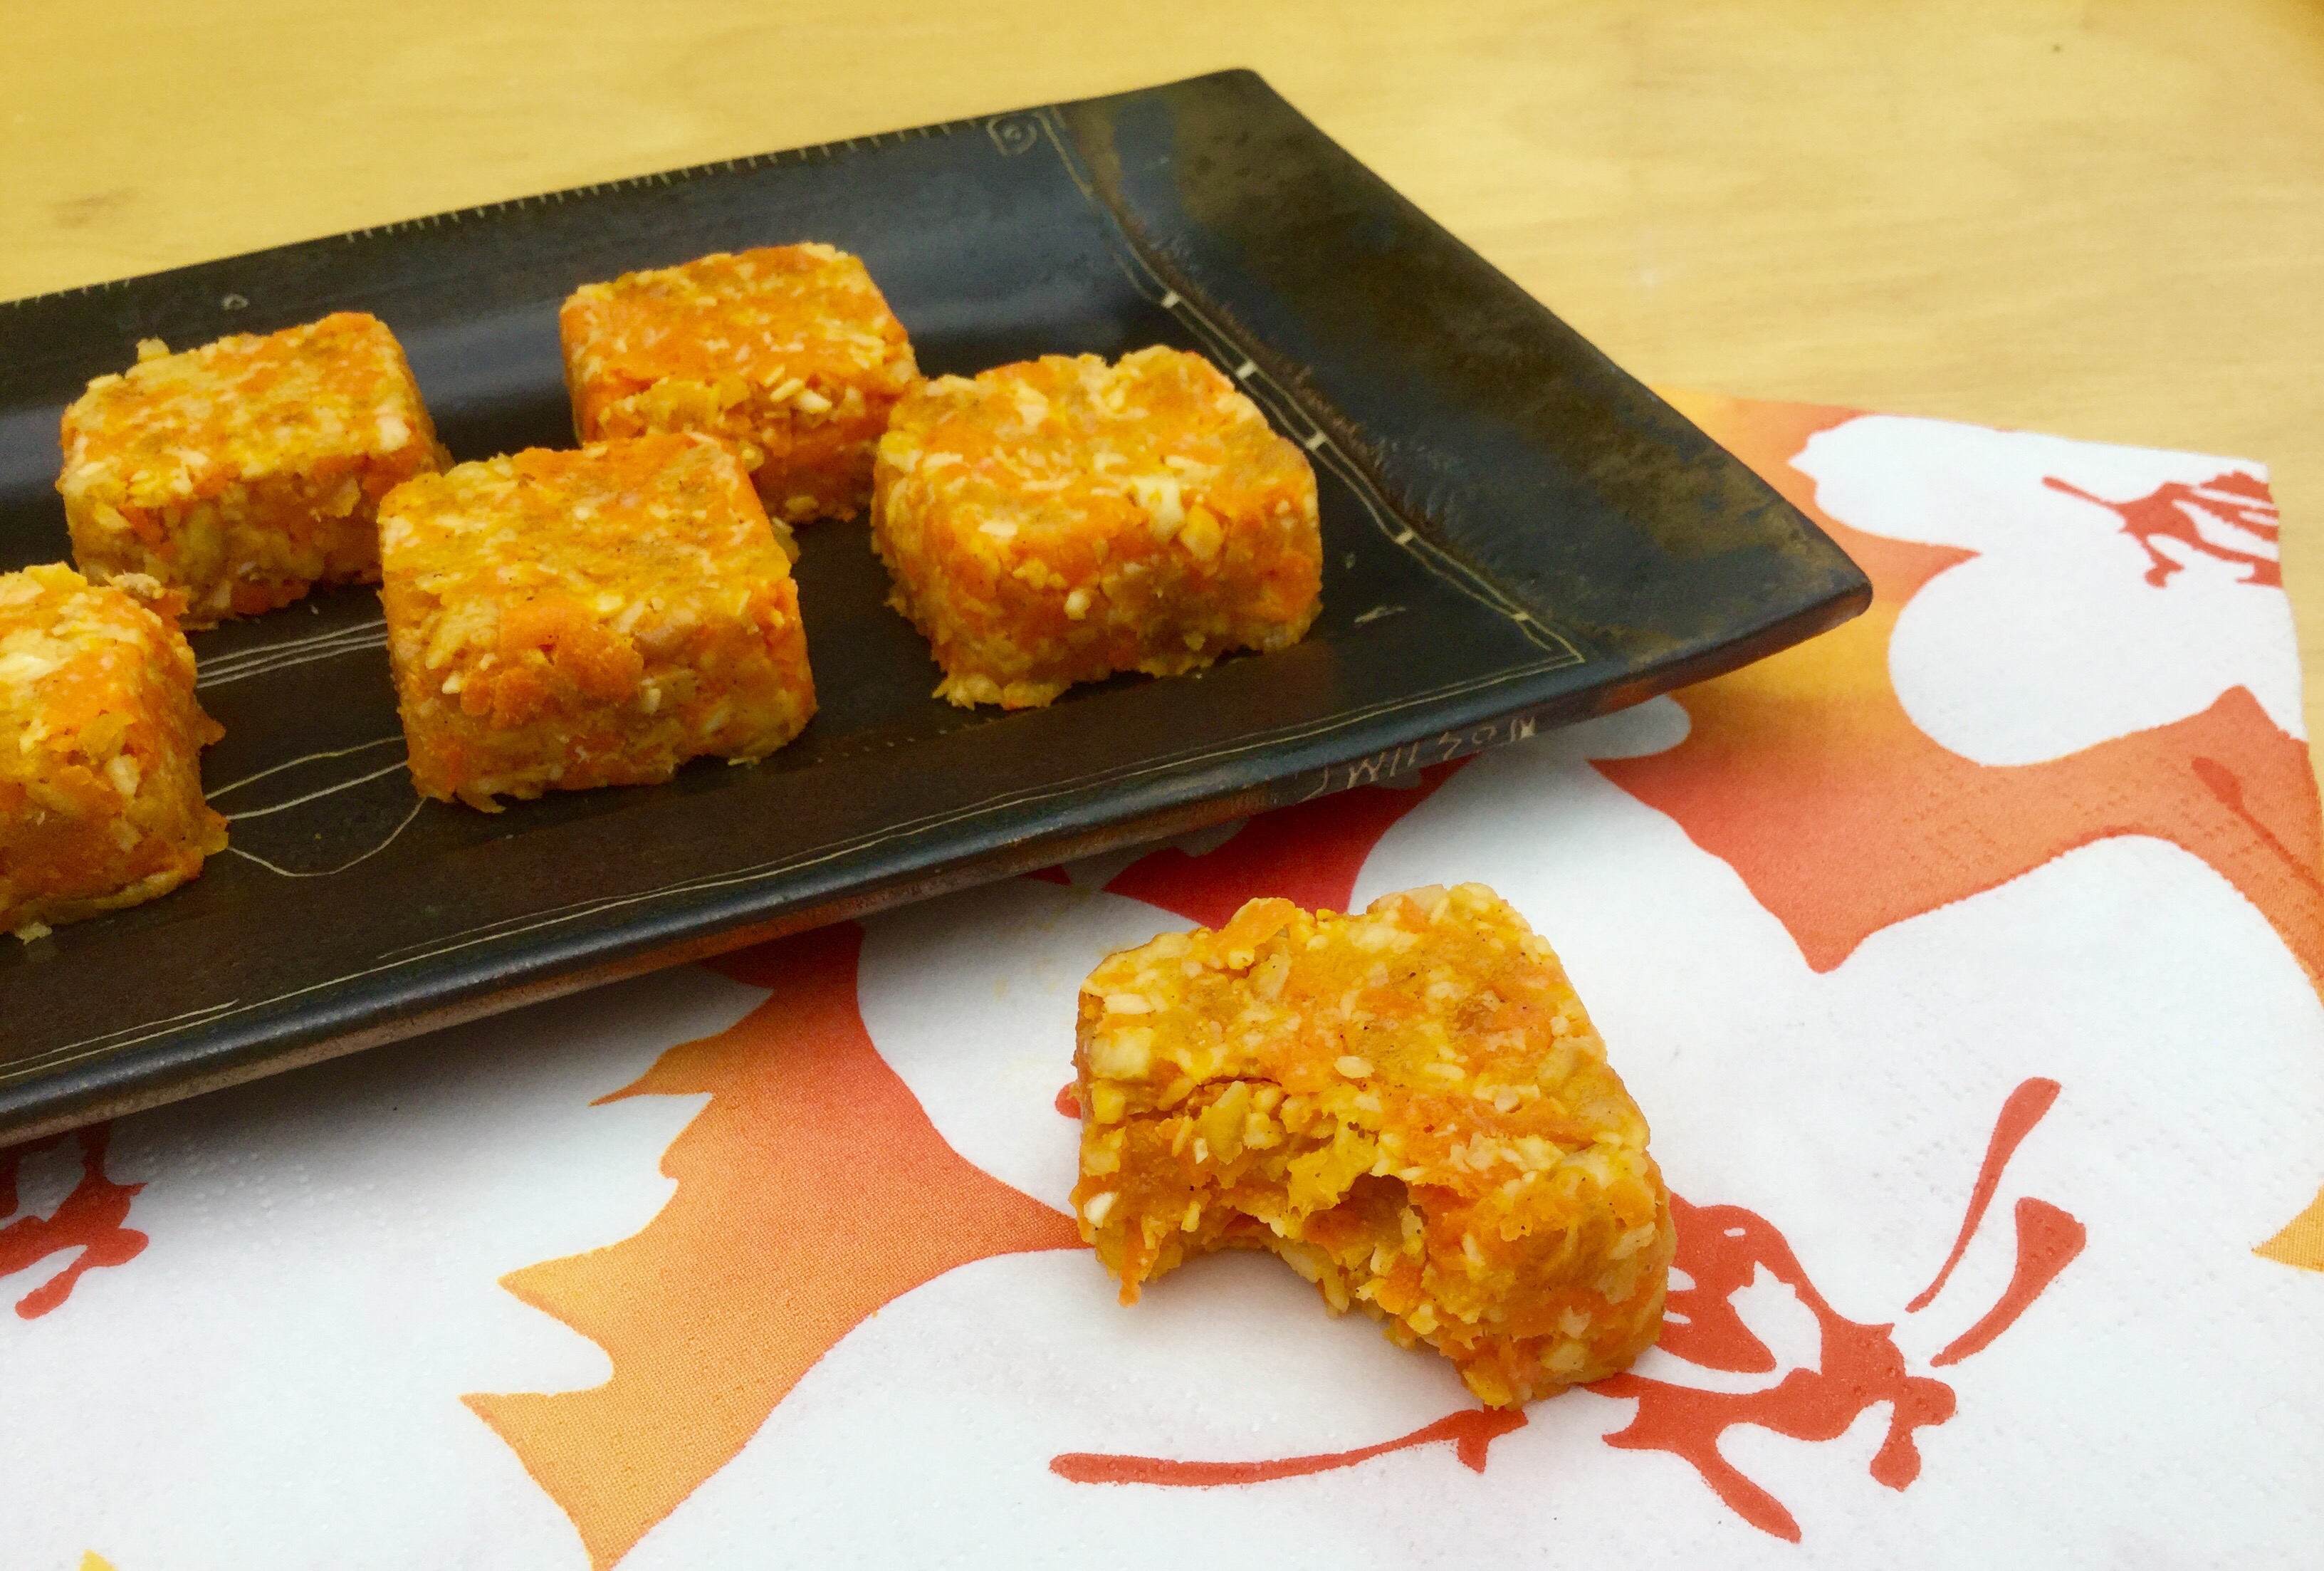 These energy squares are fresh and light with freshly grated carrot, apricots and cashews. There is no sugar needed as the apricots provide natural sweetness